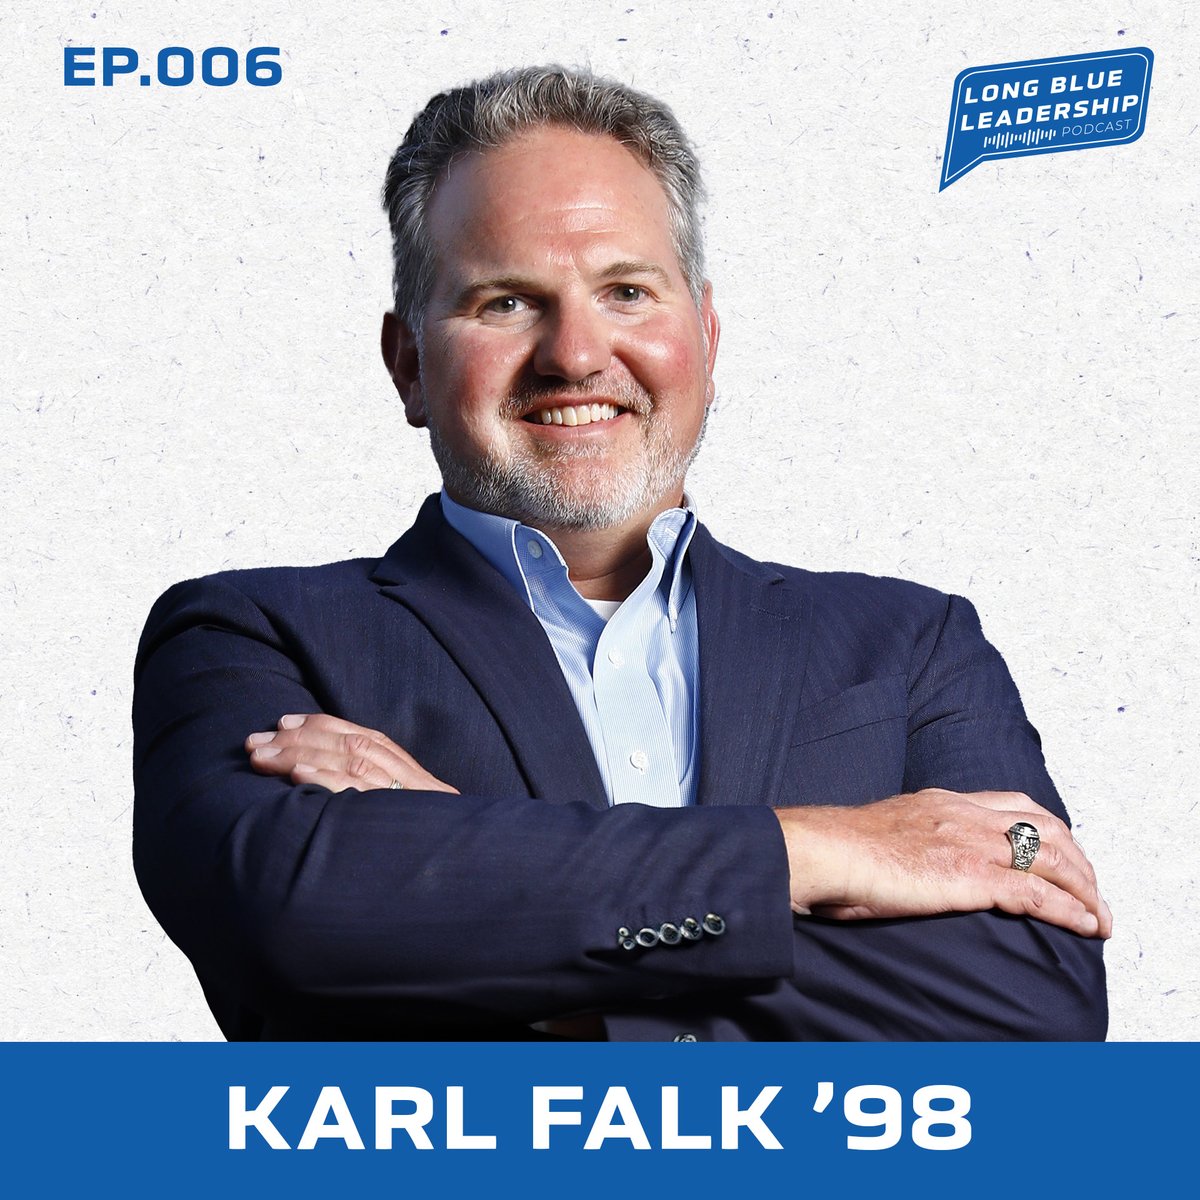 𝐓𝐡𝐞 '𝐋𝐨𝐧𝐠 𝐁𝐥𝐮𝐞 𝐋𝐞𝐚𝐝𝐞𝐫𝐬𝐡𝐢𝐩' 𝐩𝐨𝐝𝐜𝐚𝐬𝐭 Join Karl Falk '98, the founder and CEO of @BotDocIt for a conversation about boldness, the nuanced human spirit and a leader's path to success. 𝙇𝙞𝙨𝙩𝙚𝙣 𝙉𝙤𝙬! bit.ly/3IBWVlk